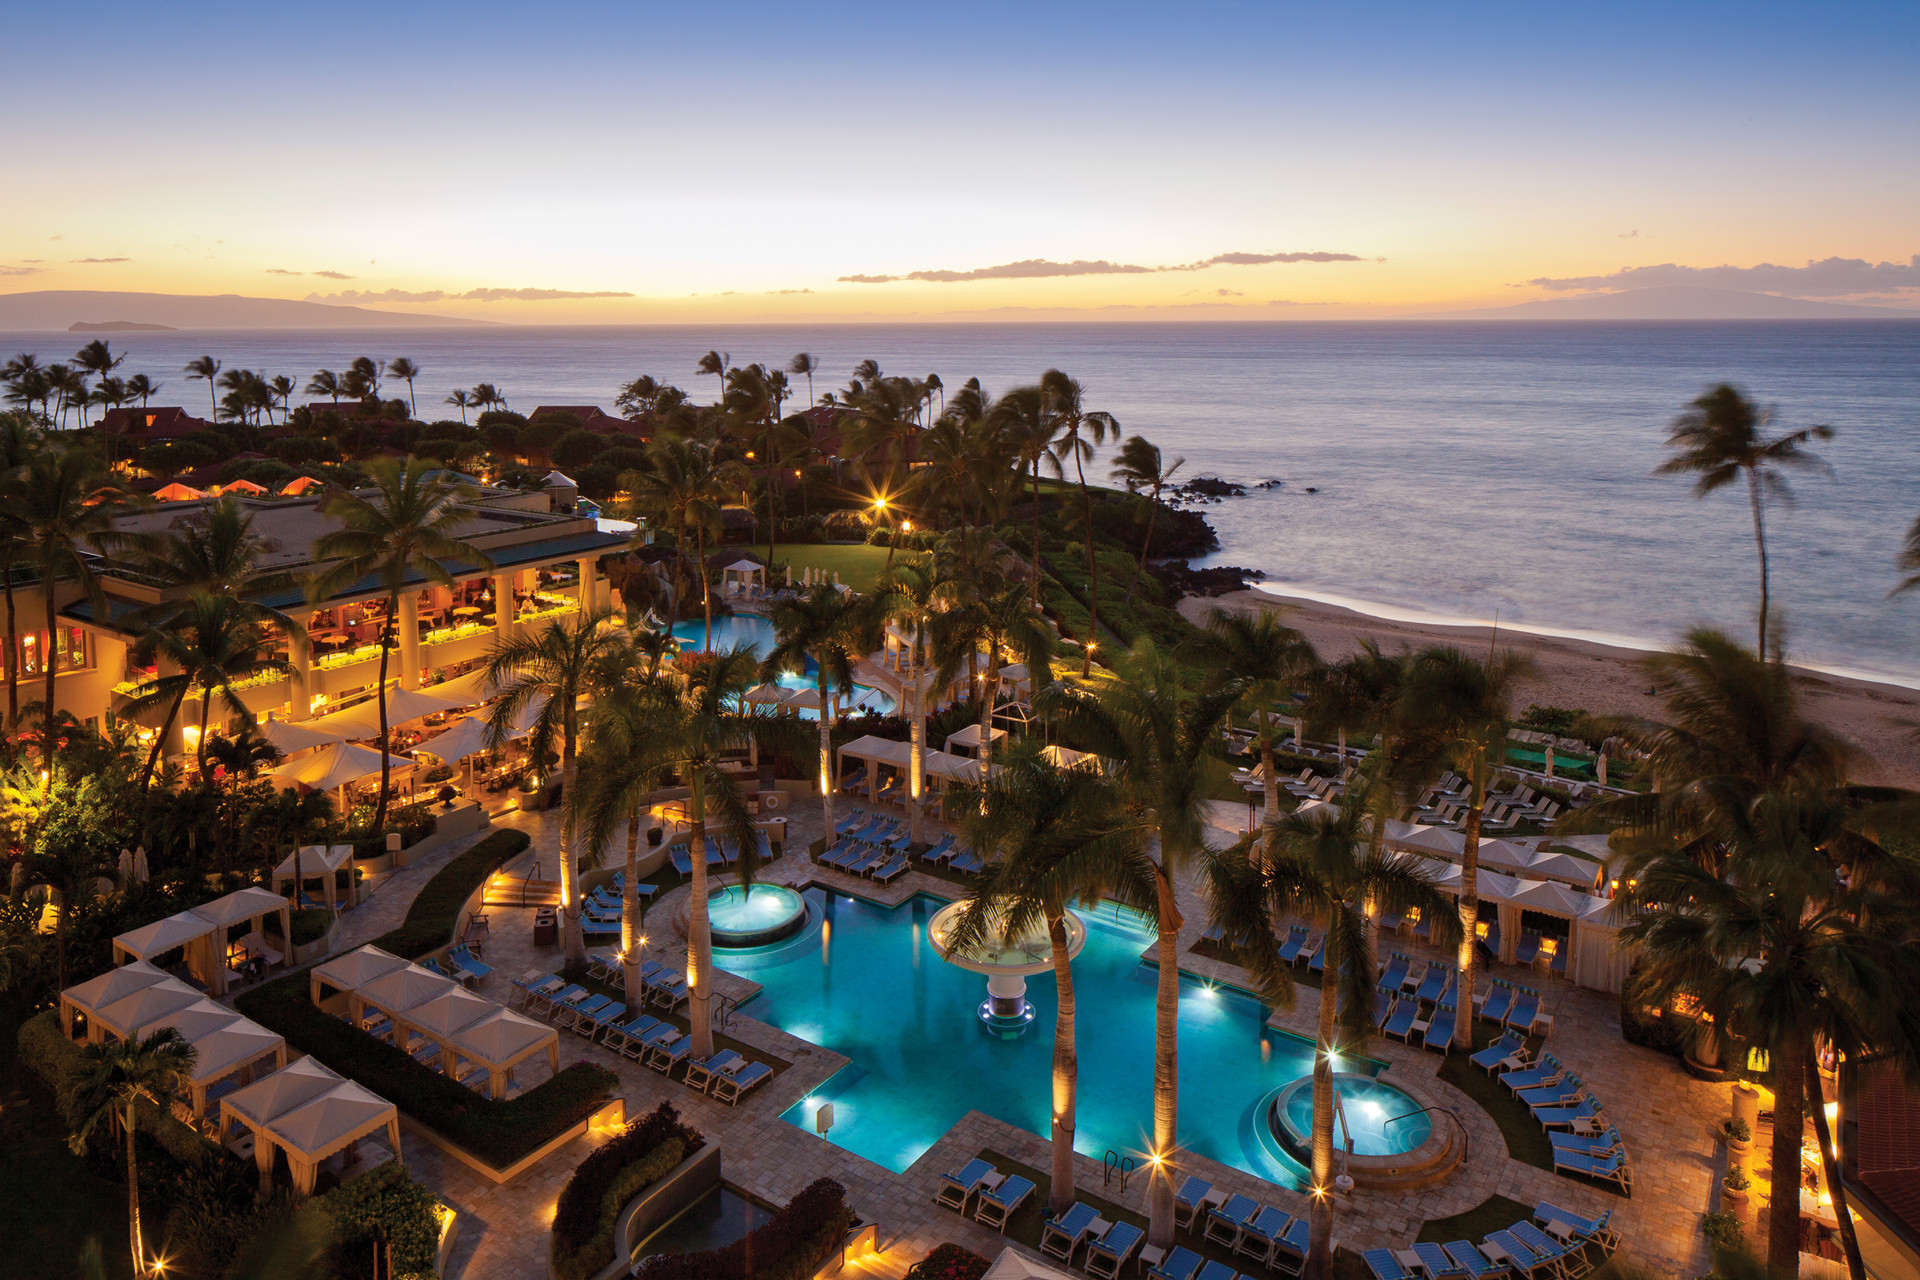 Four Seasons Resort Maui will serve as home base, pampering guests with luxurious accommodations and amenities.